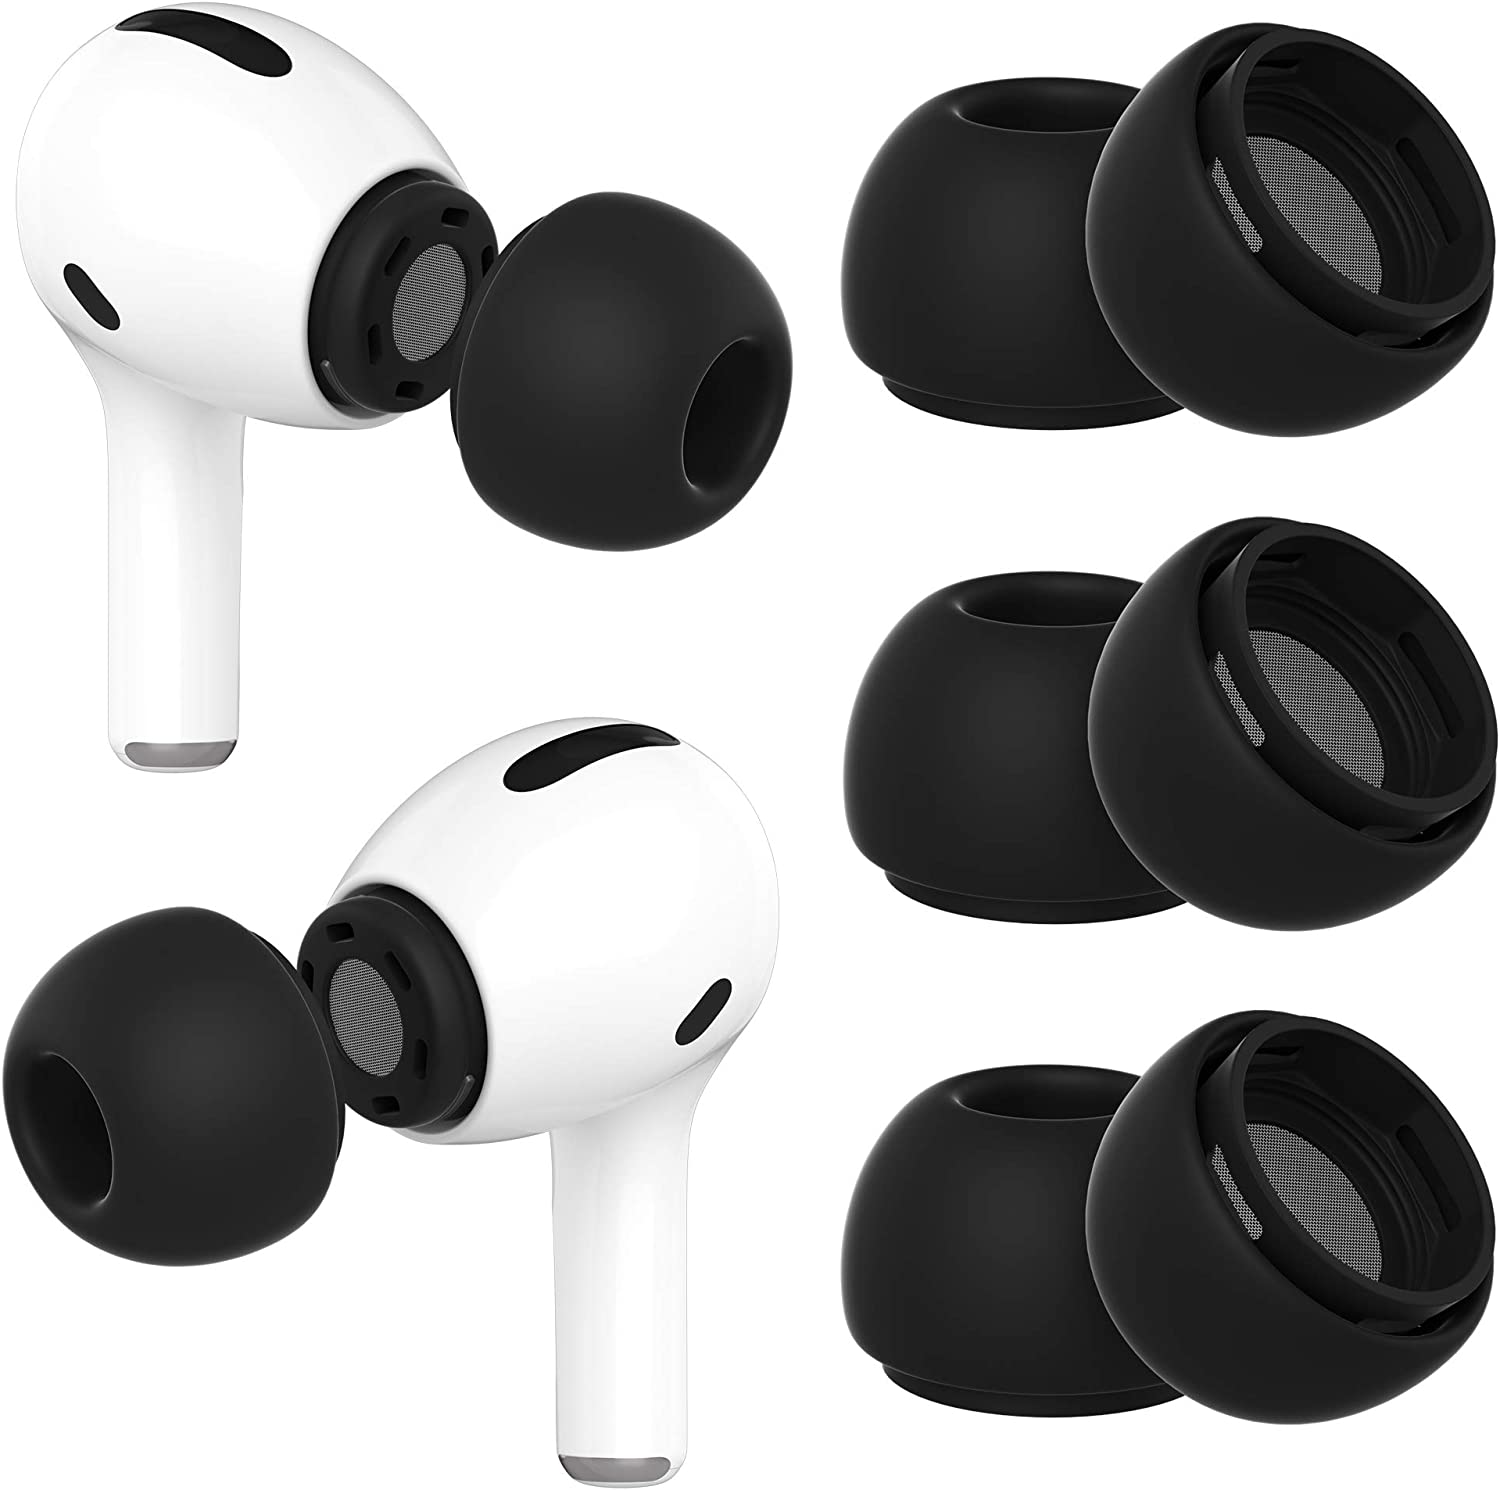 Premium Memory Foam Ear Tips for AirPods Pro, 3 PAIRS, S,M,L Replacement  Buds